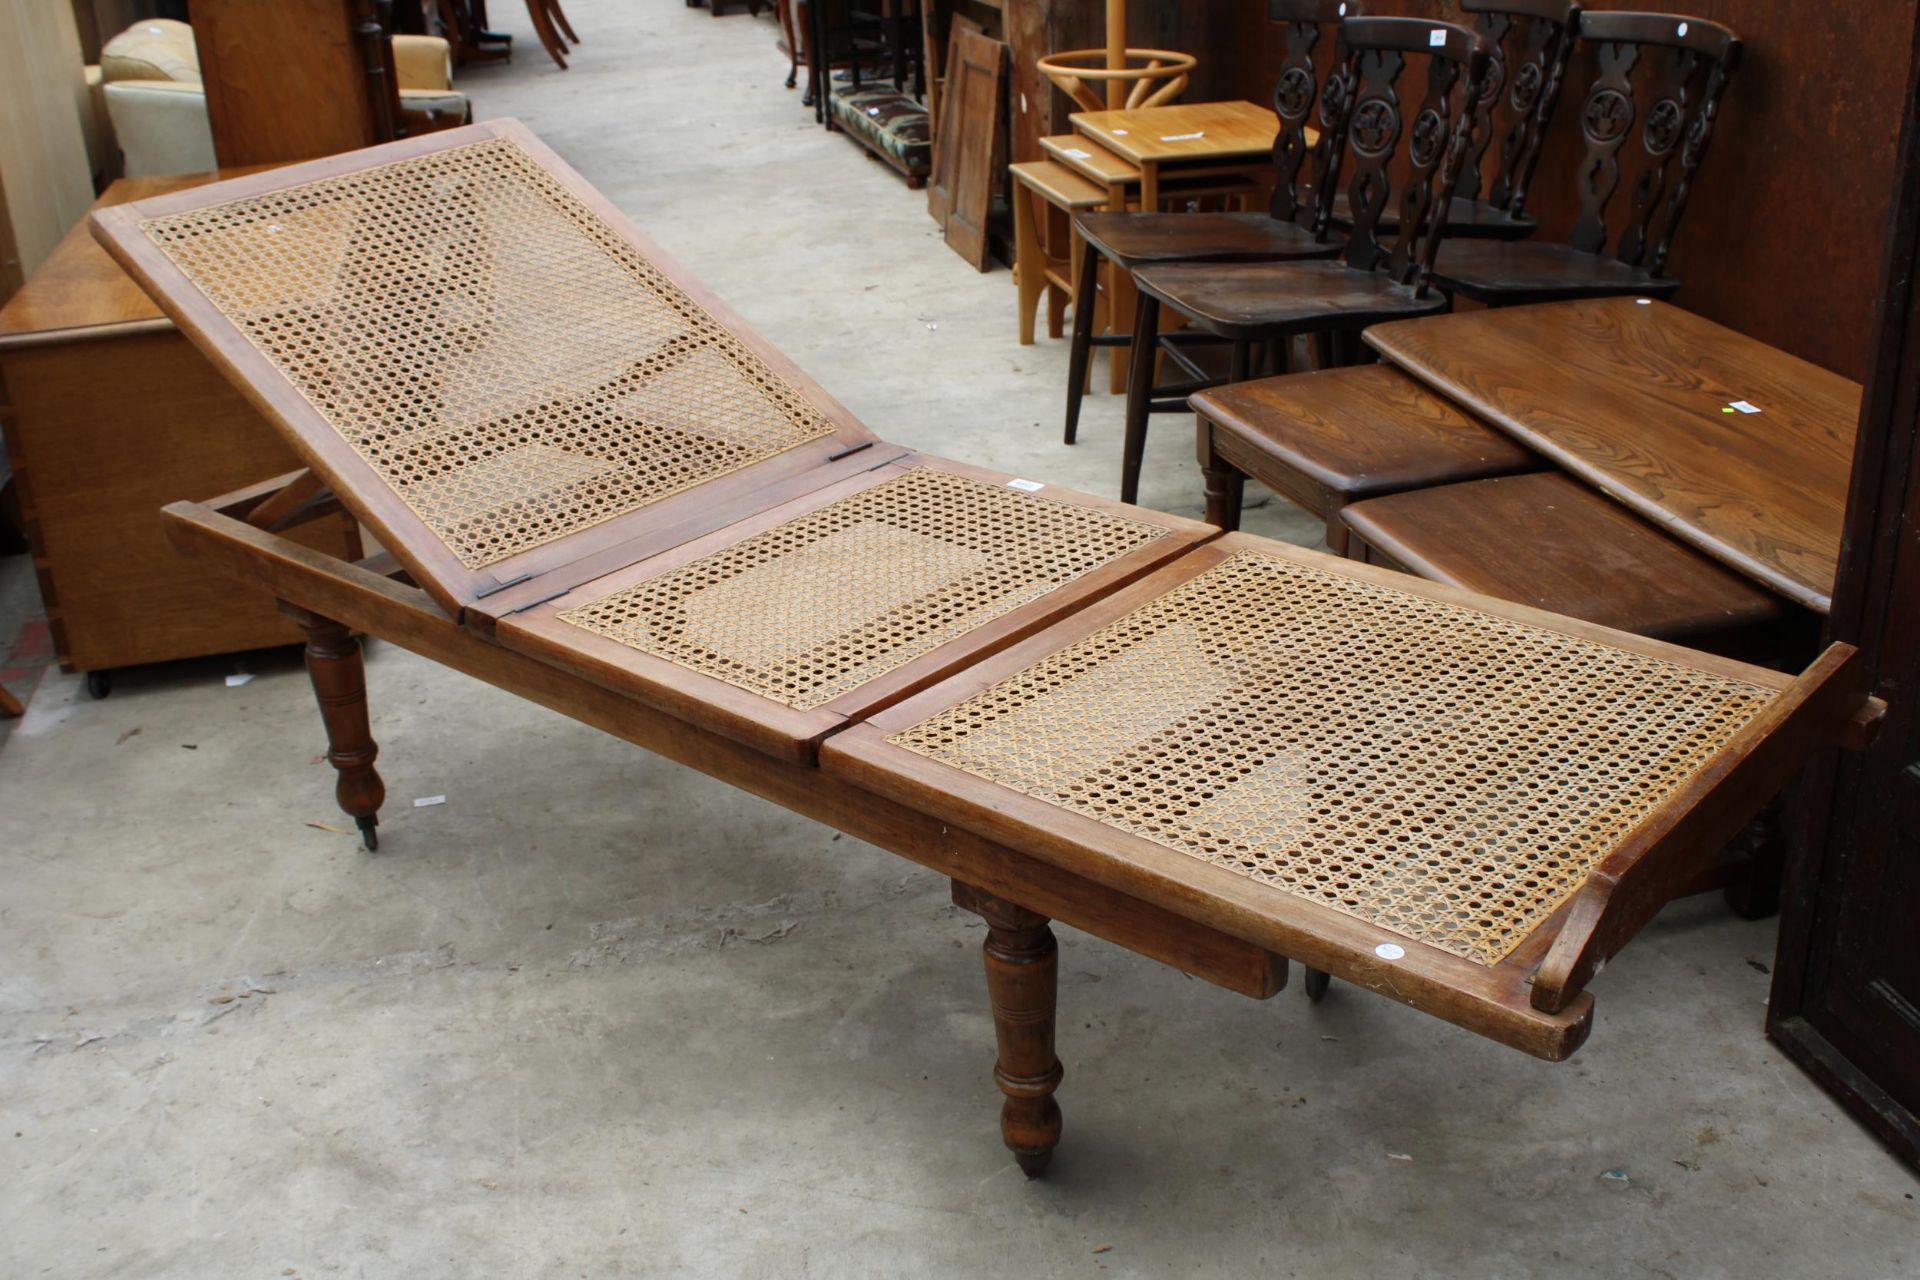 A LATE VICTORIAN HARDWOOD FOLDING DAY BED ON TURNED LEGS WITH SPLIT CANE SEATS/BACK - Image 7 of 7